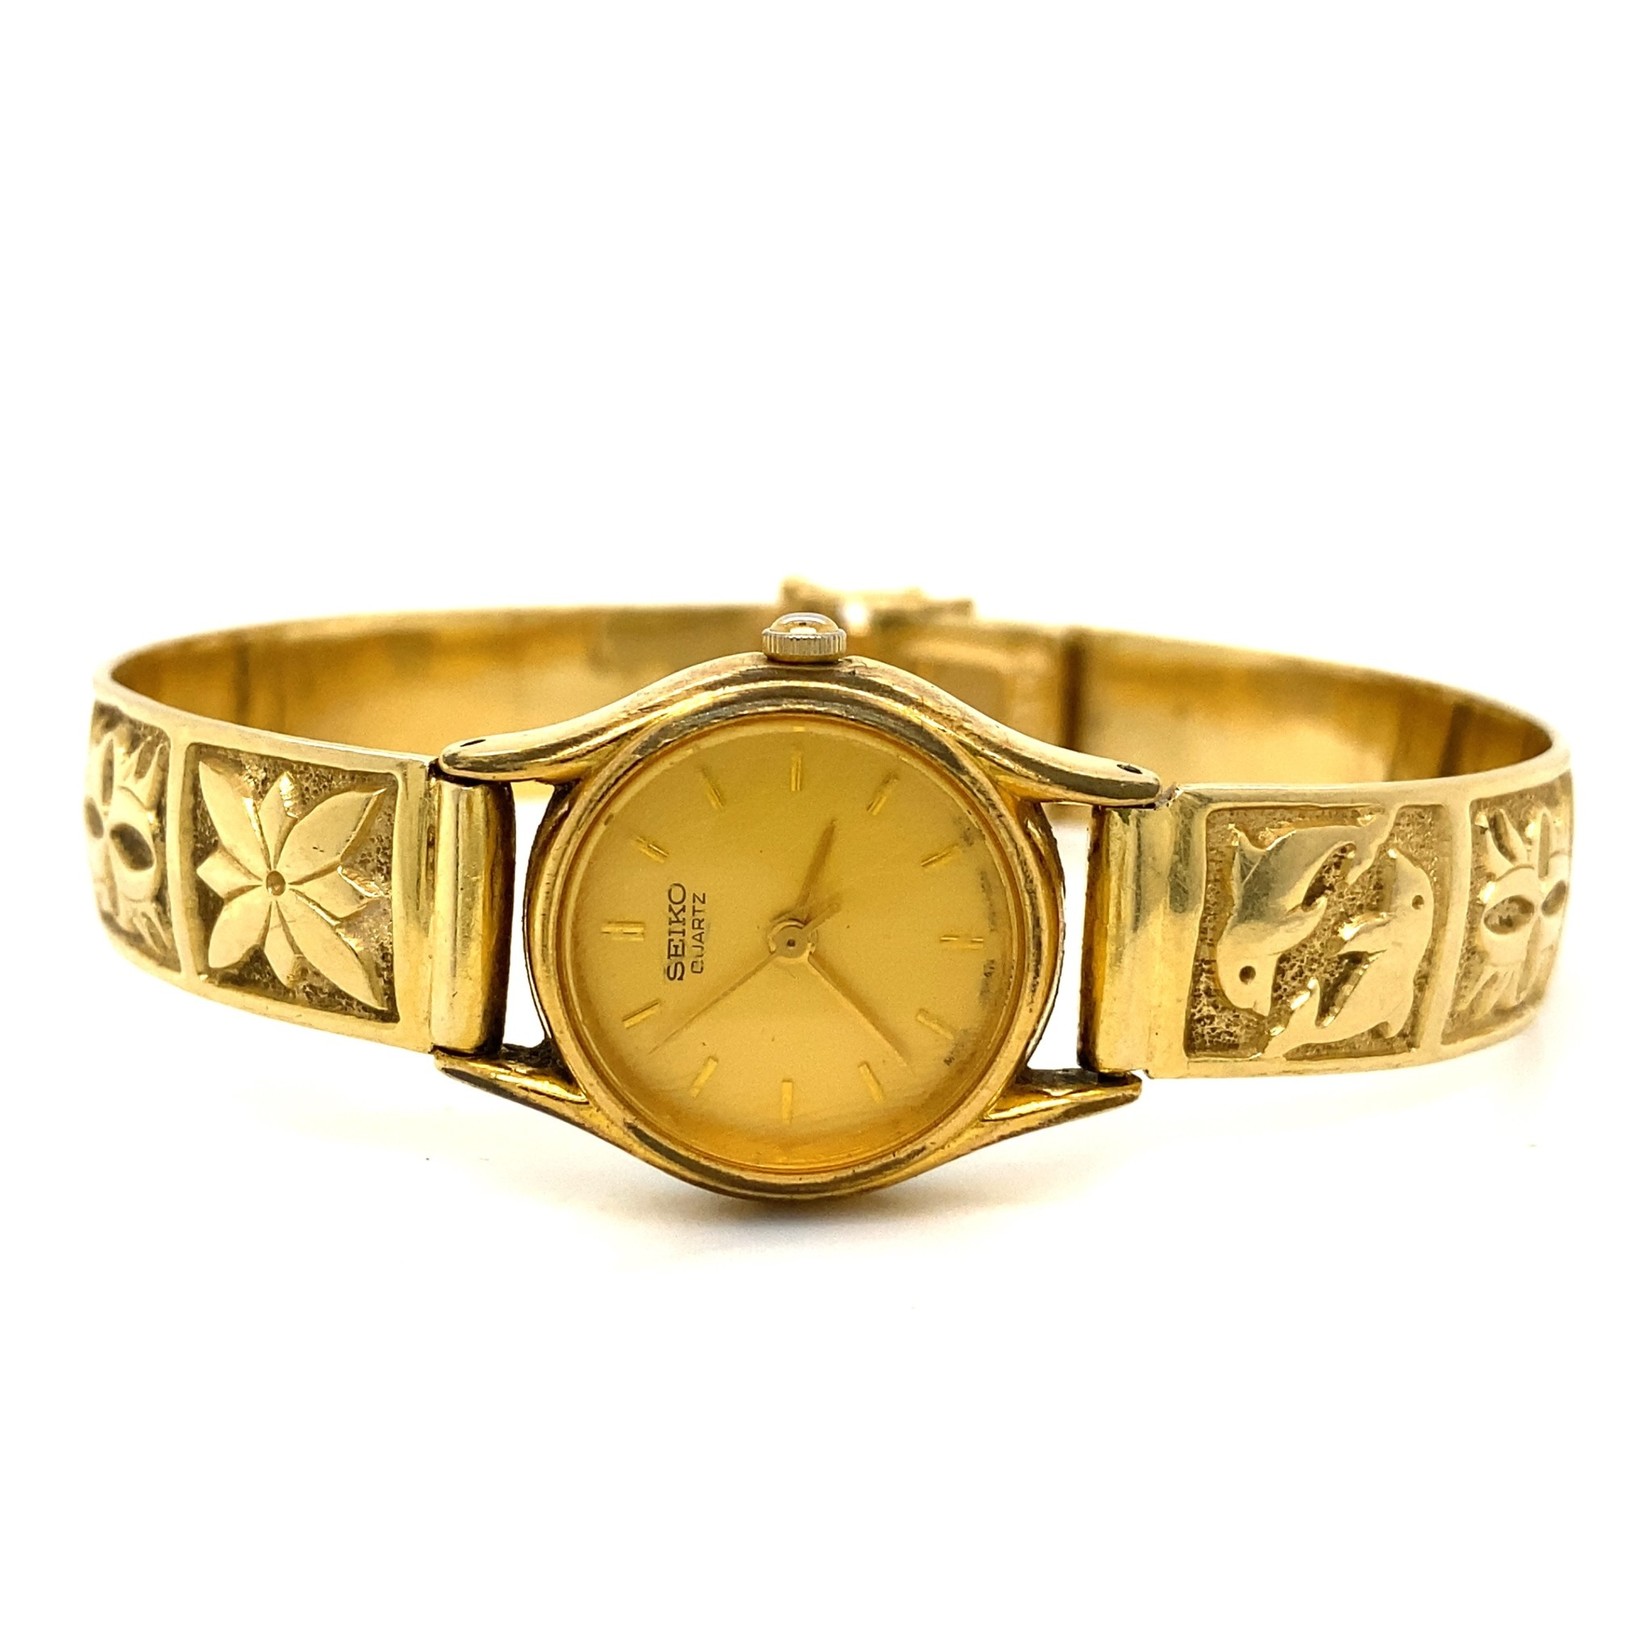 Yellow Tone Seiko watch with 14K Yellow Gold Quilt Bracelet